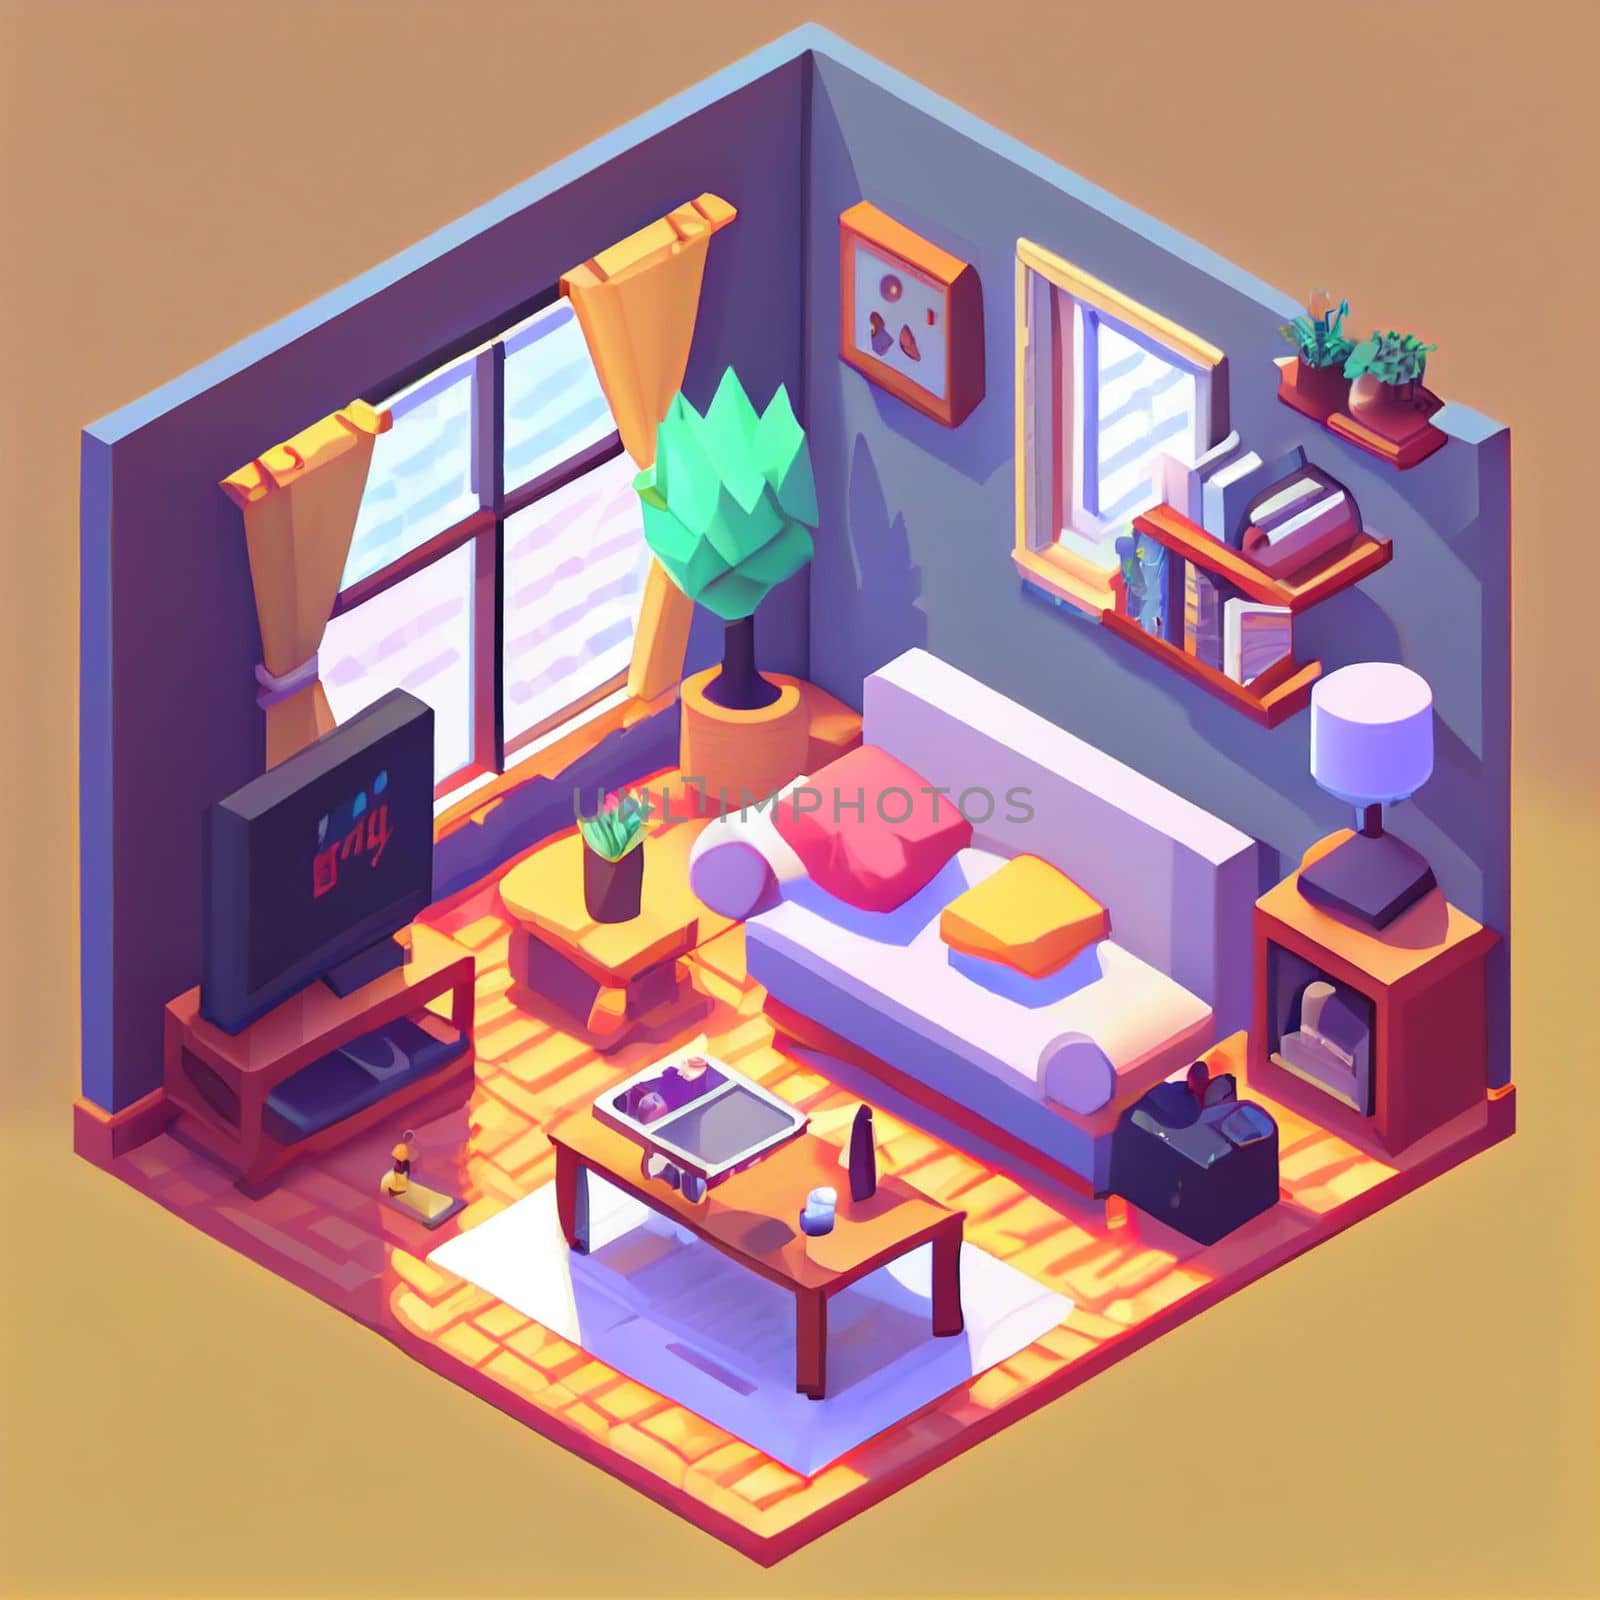 3d illustration isometric interior cute design. Living room includes sofa, coffee table, windows, curtain, clock, frame and other furniture. A lot of voluminous objects and details.